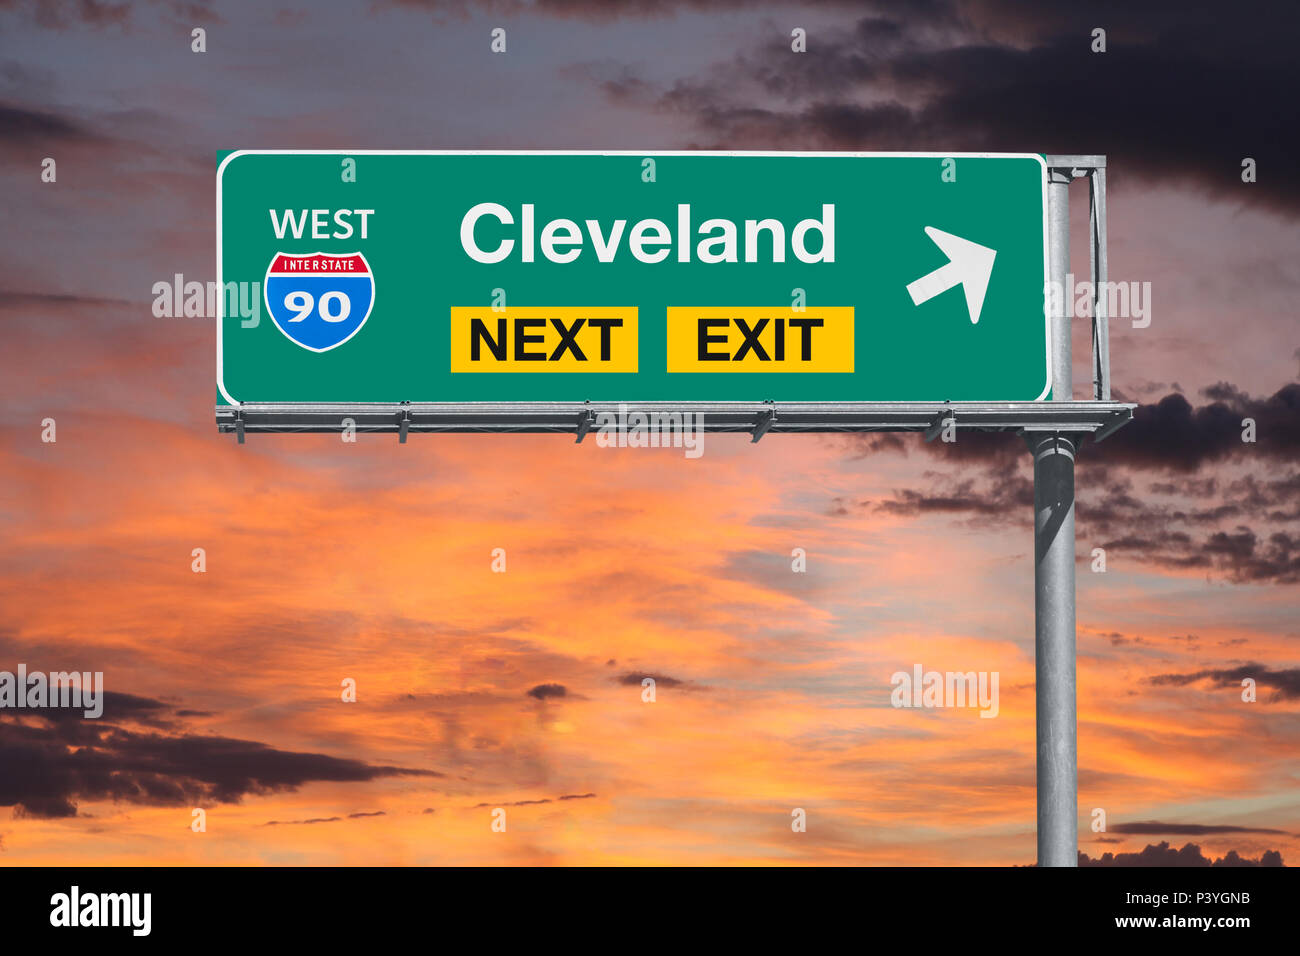 Cleveland Ohio route 90 freeway next exit sign with sunset sky. Stock Photo